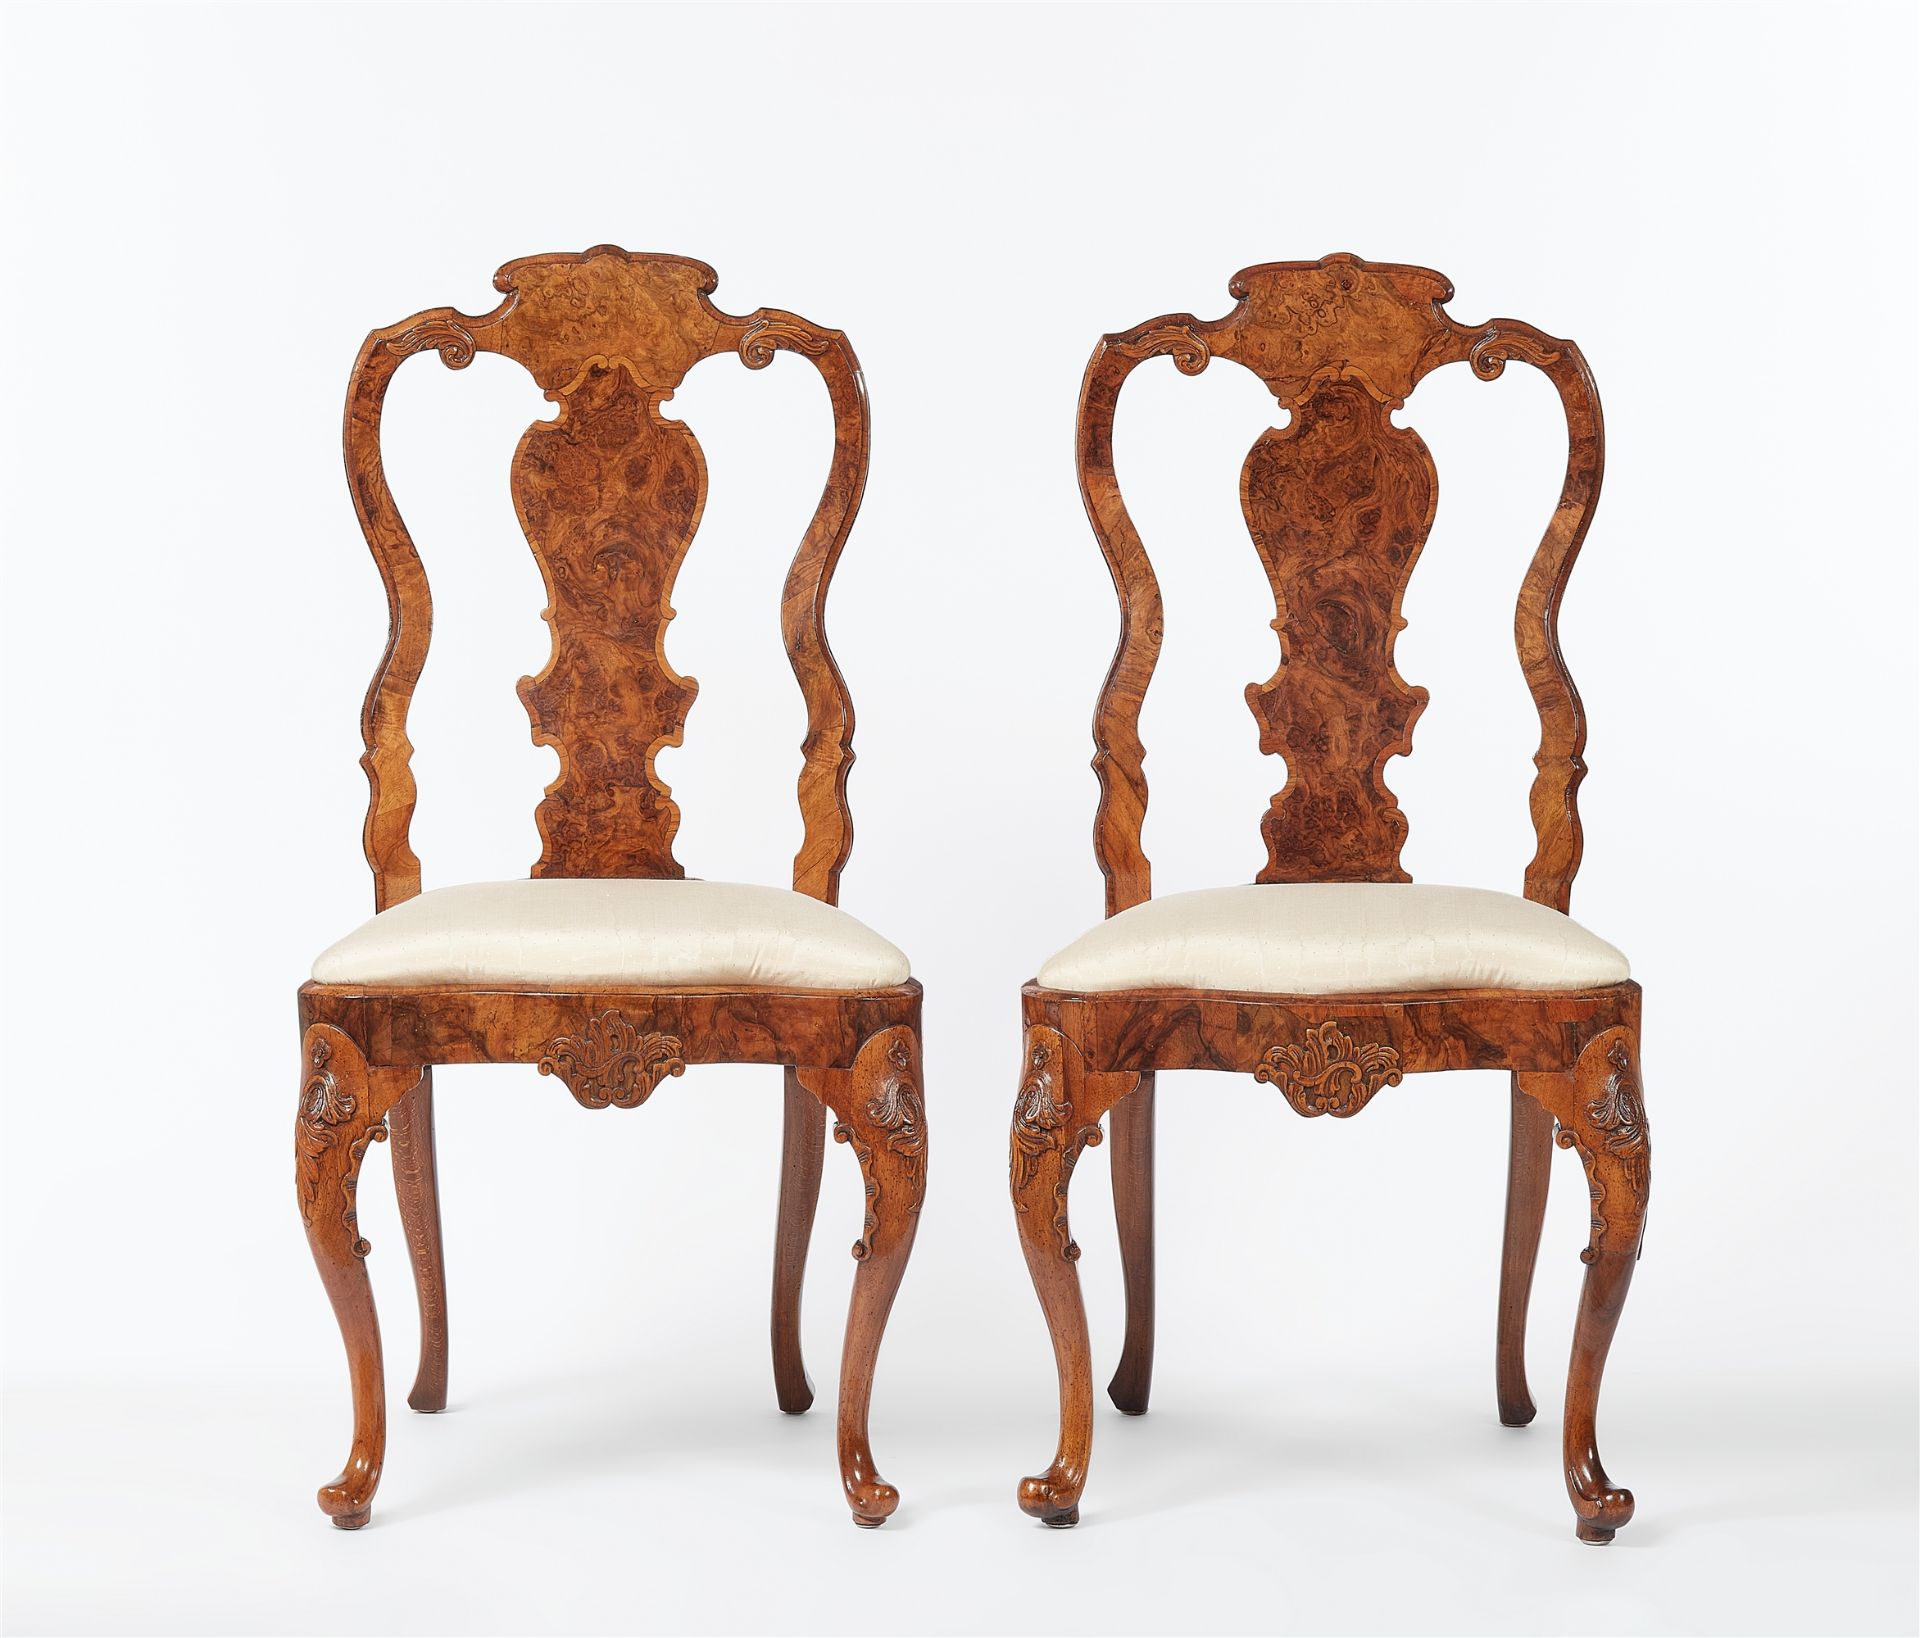 Four chairs by Abraham Roentgen